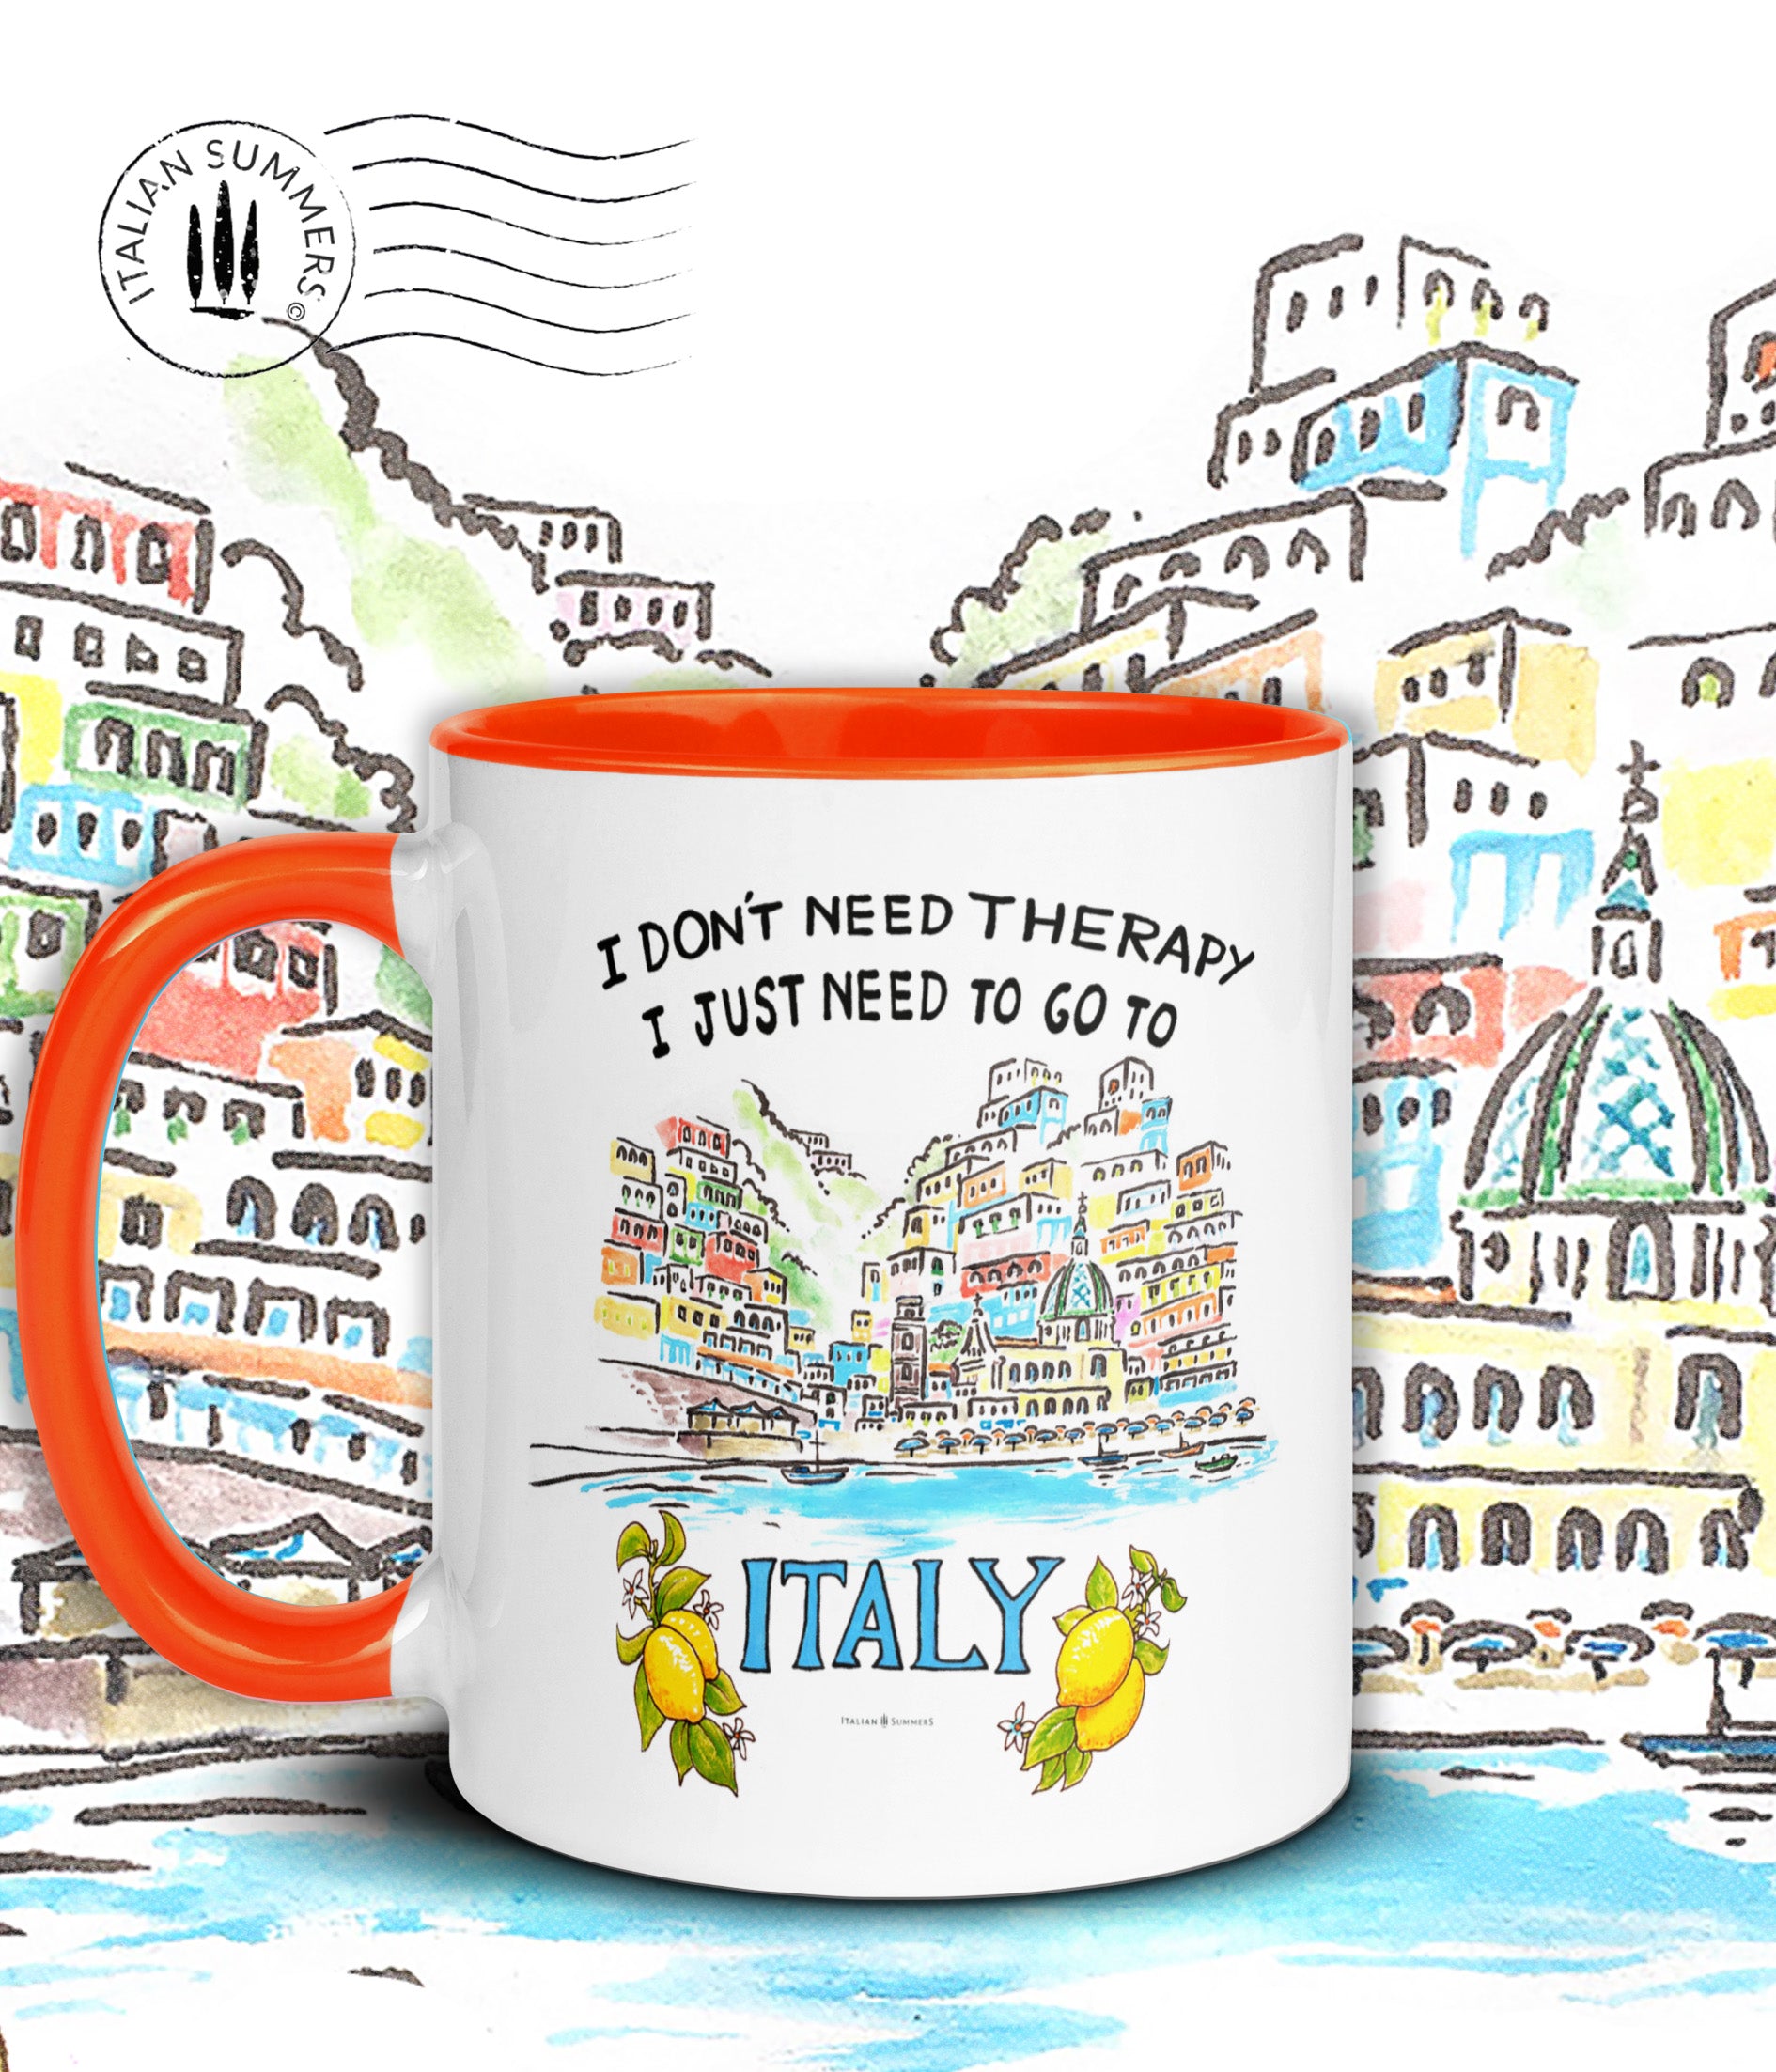 Italy mug inspired by the beauty of Italy's riviera's. The mug has the quote I don't need therapy, I just need to go to italy"The quote is accompagnied wit a sketch of Positano seen from the Mediterranean sea. The sketch is a water clolor sketch filled with ice cream colored houses and a part of the beach with beach umbrellas. Printed on 2 sides. The inside/handle of the mug is available in pink, blue, yellow and orange,...just like ice cream. :-) Made by Italian Summers